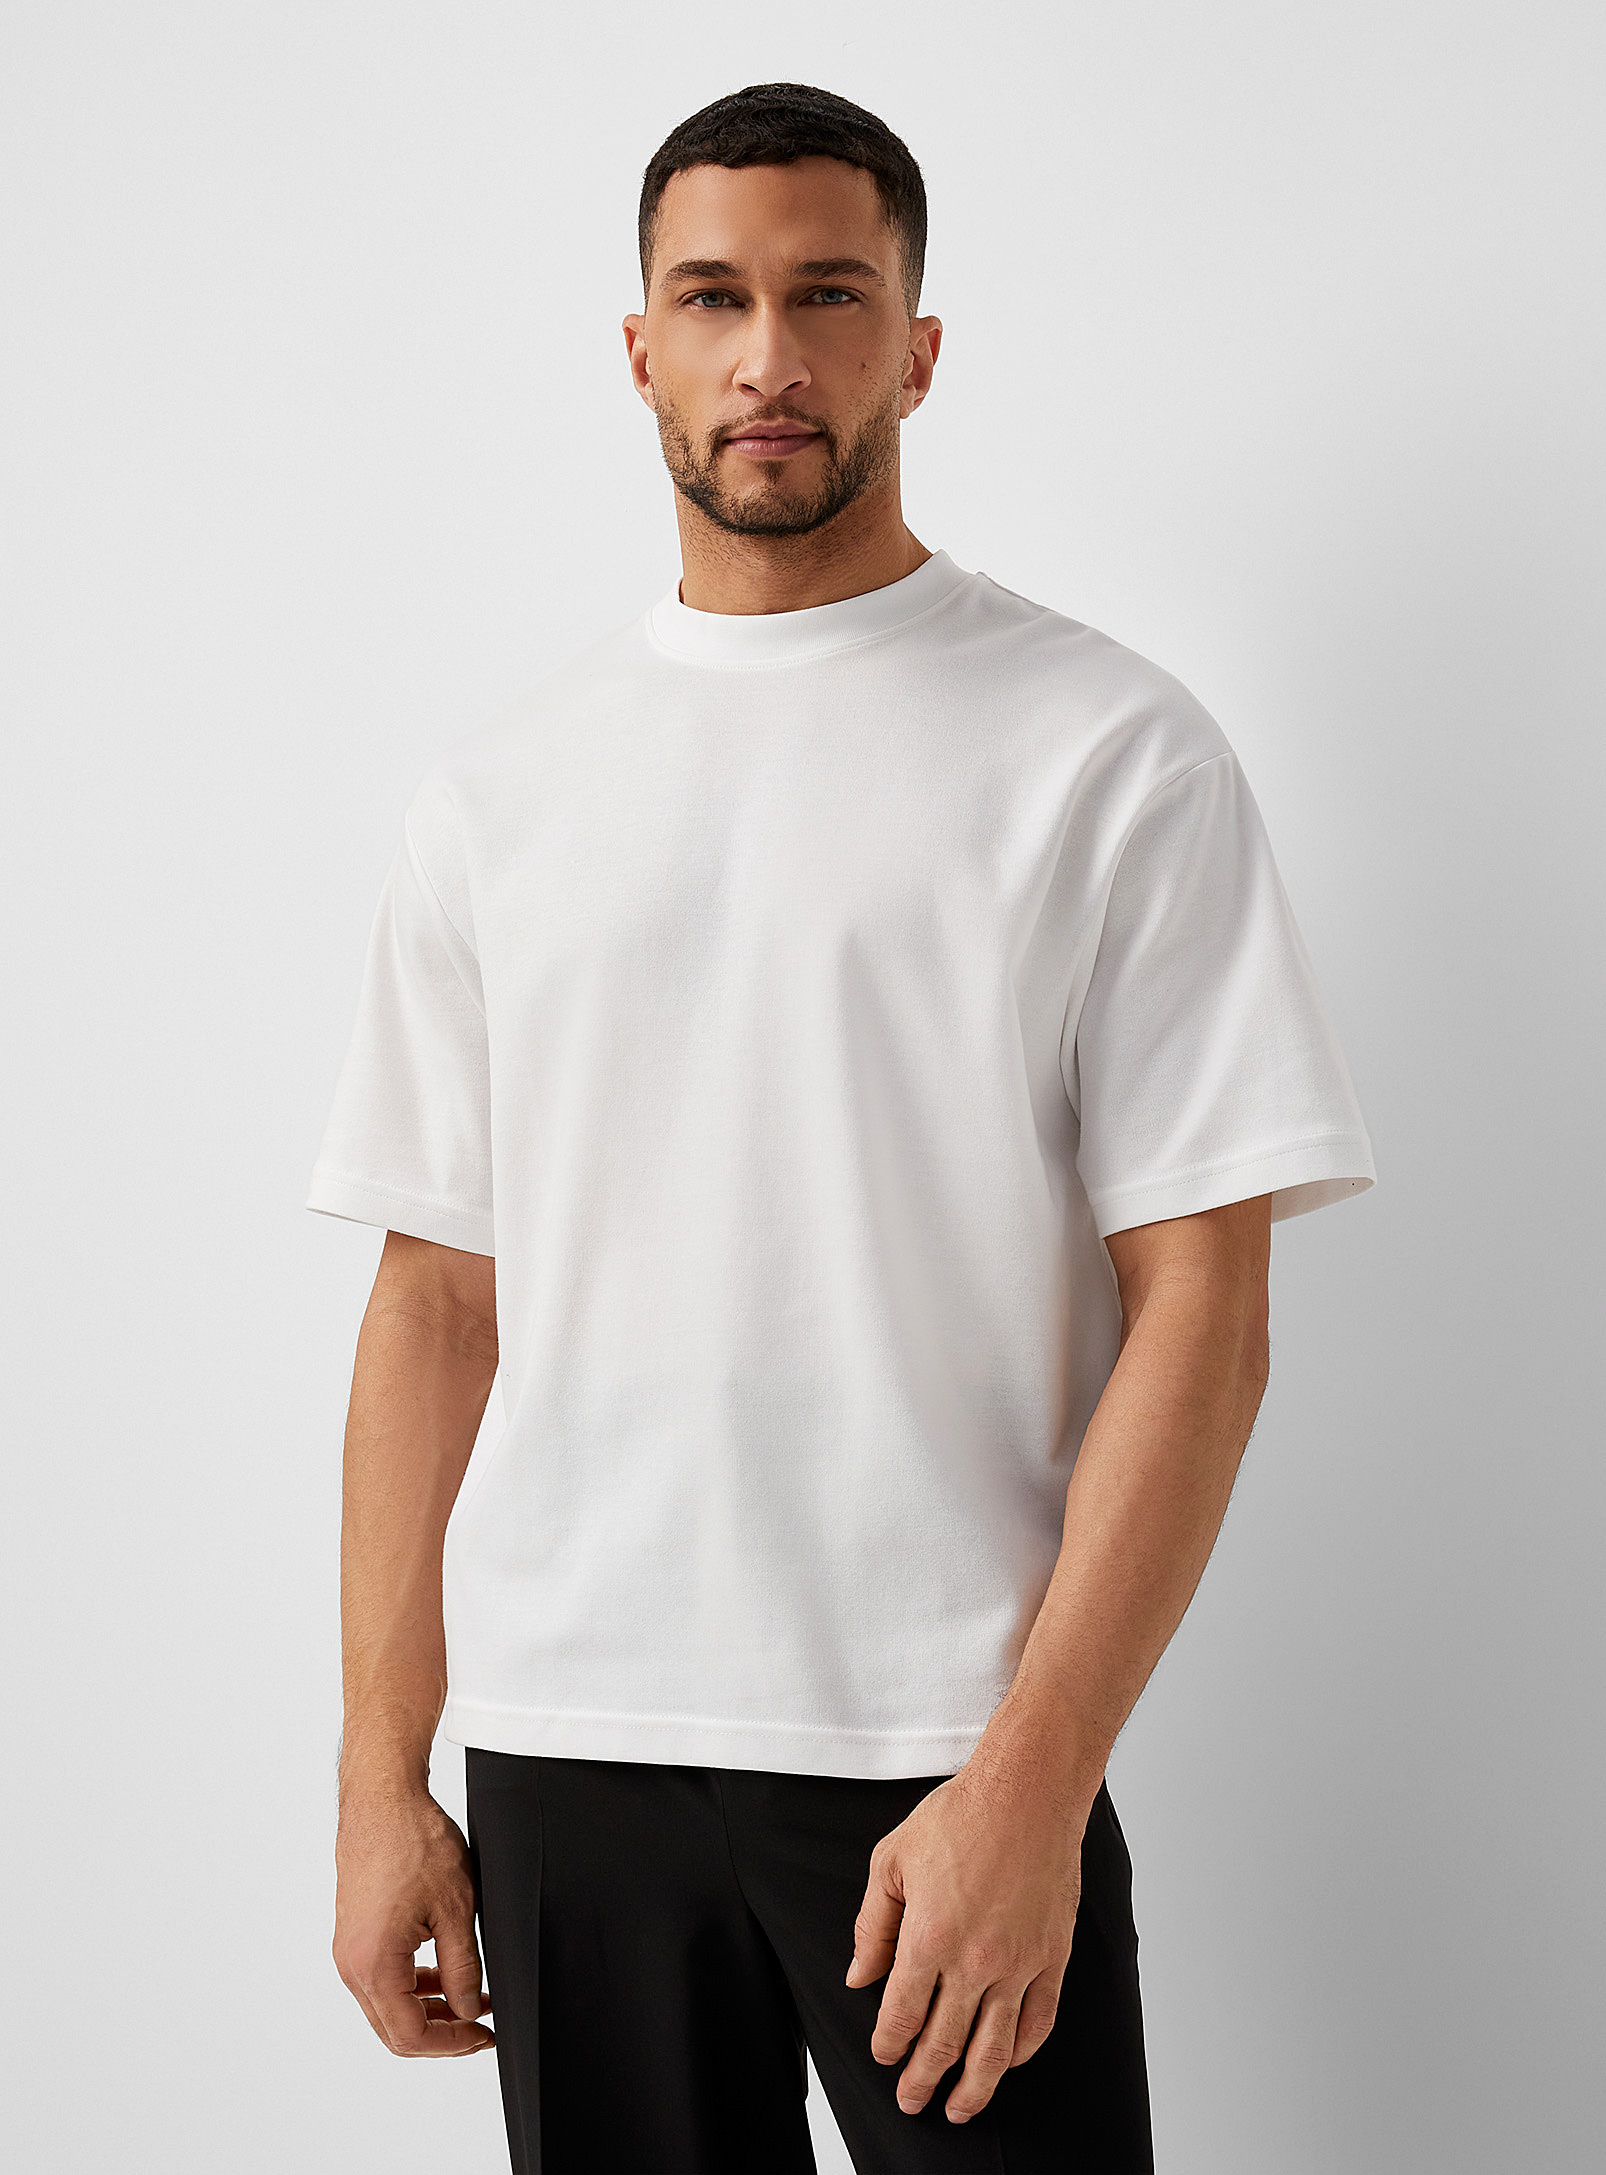 Selected Minimalist T-shirt In White